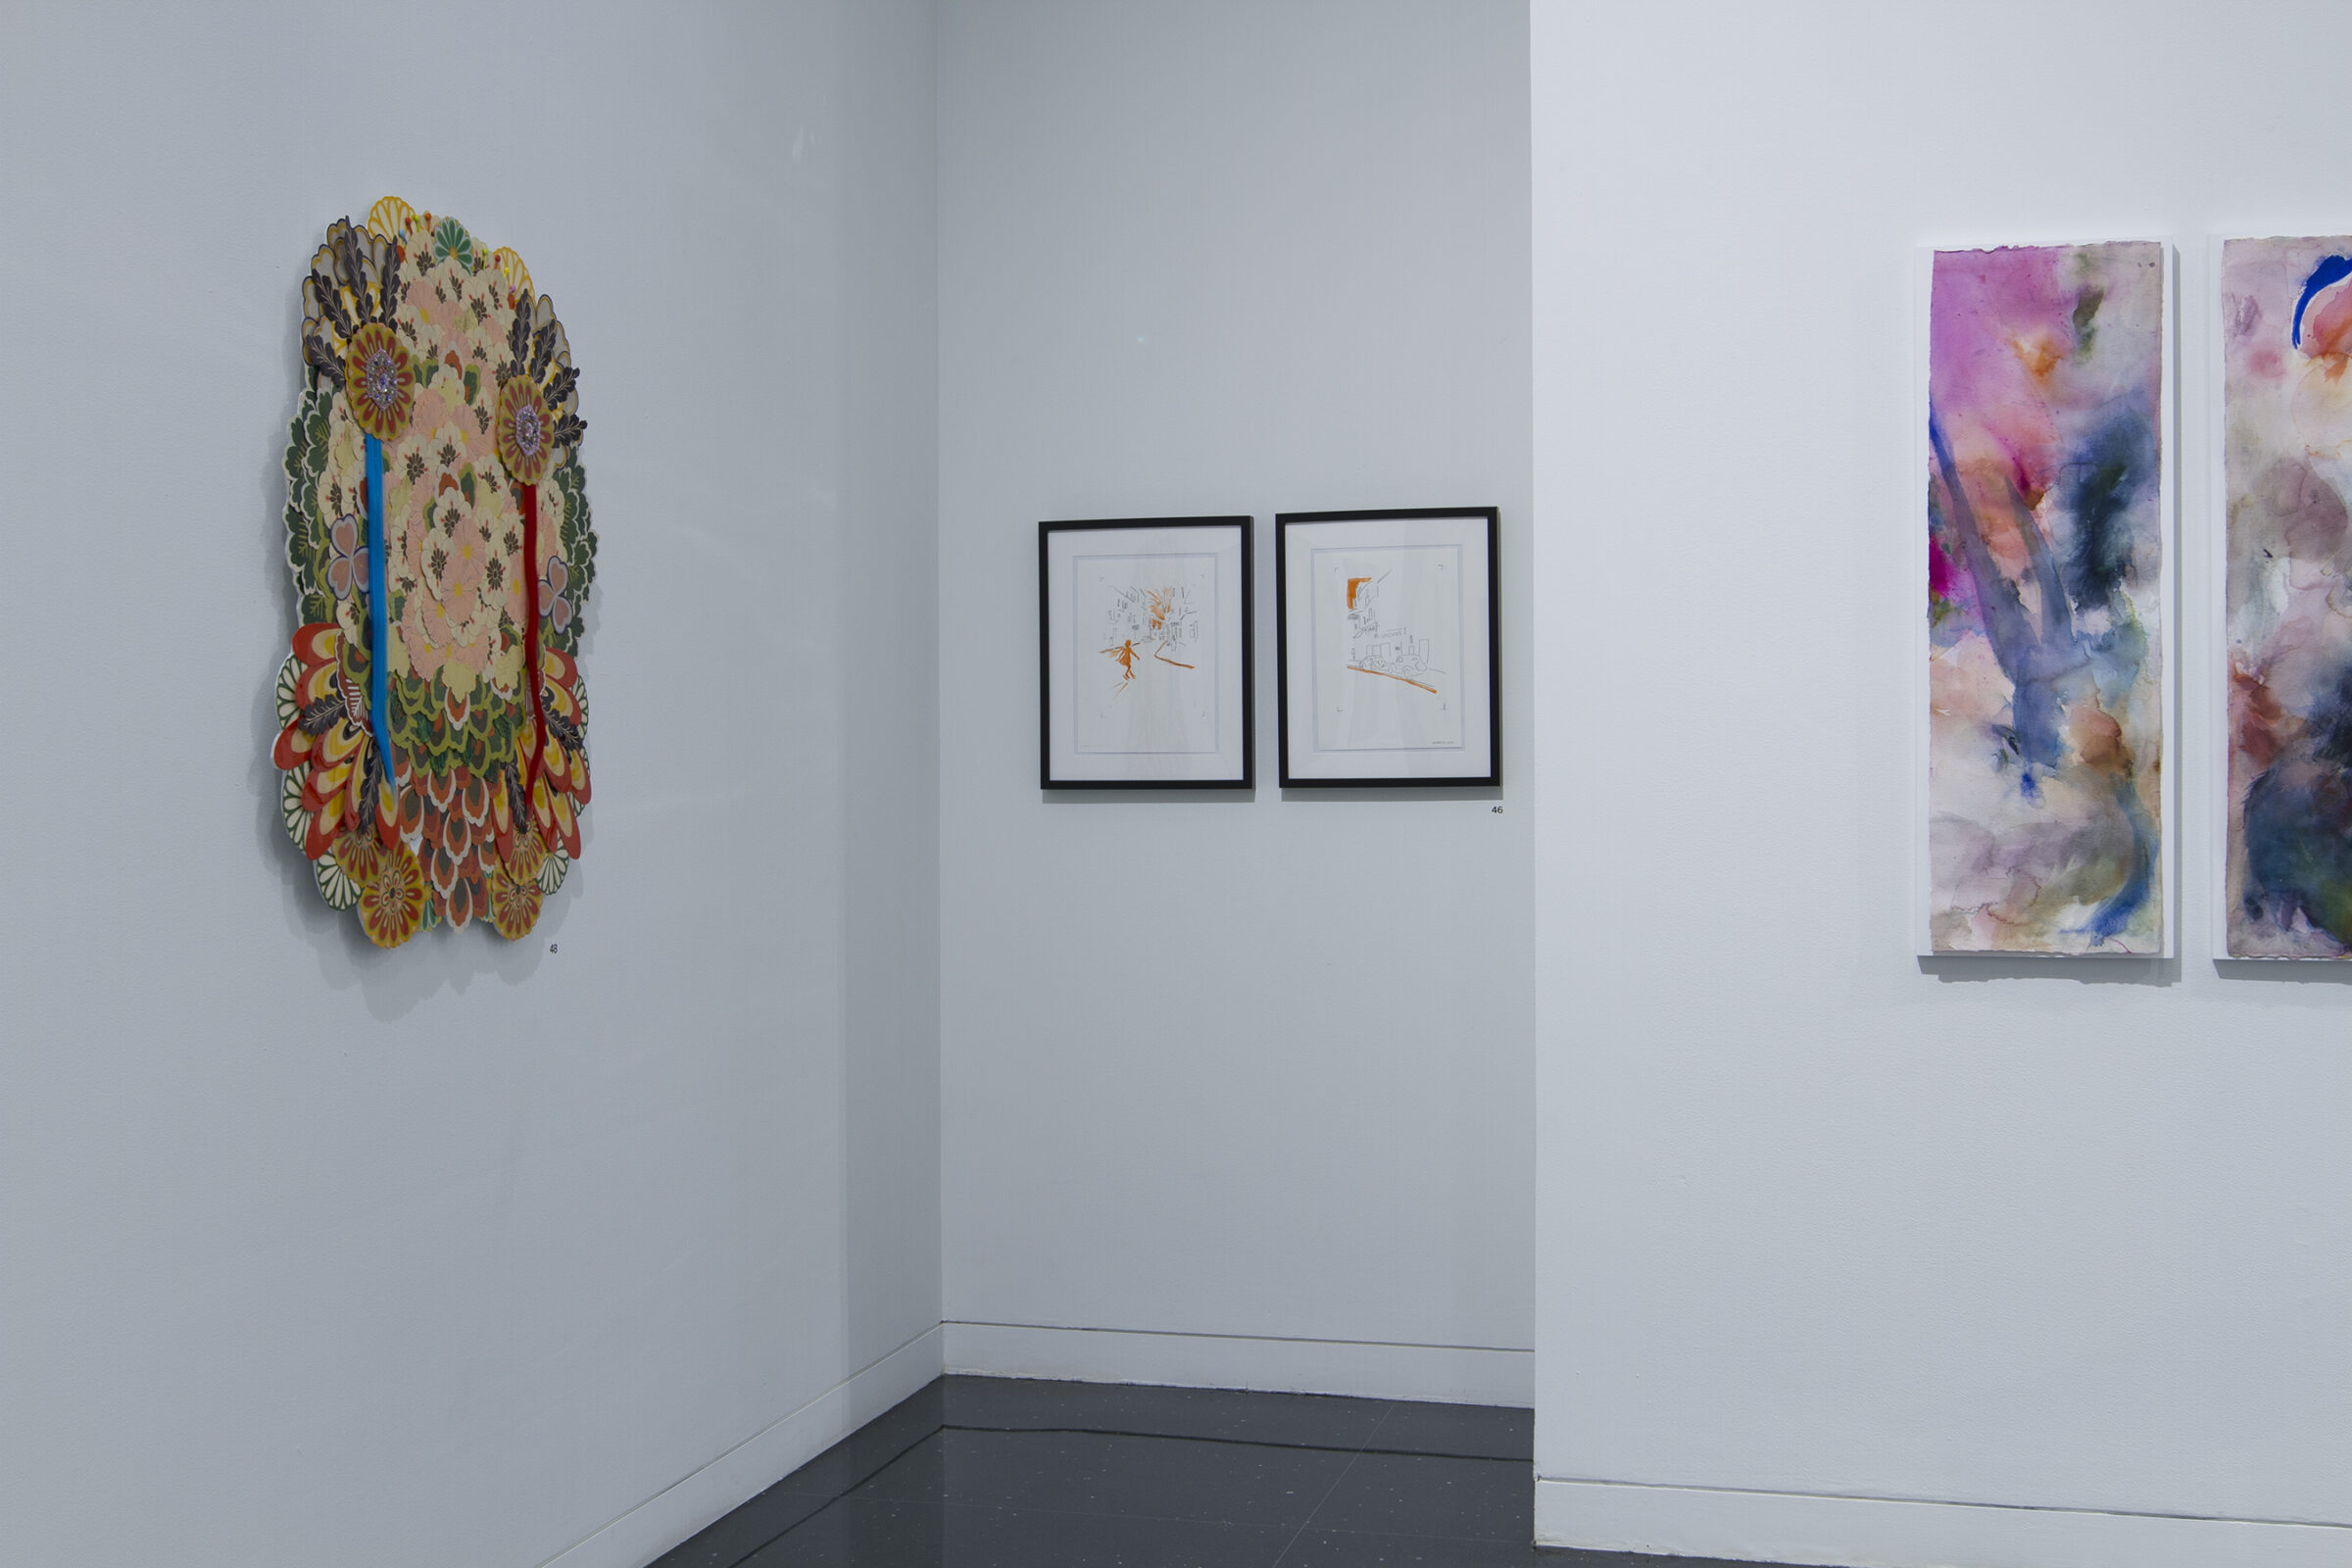 A white walled gallery space in which three artworks hang on the walls. From left to right: an oblong, colorful collage of flowers form a kaleidoscopic pattern, two small, framed drawings in a small nook, and an elongated rectangular watercolor painting of abstract form.